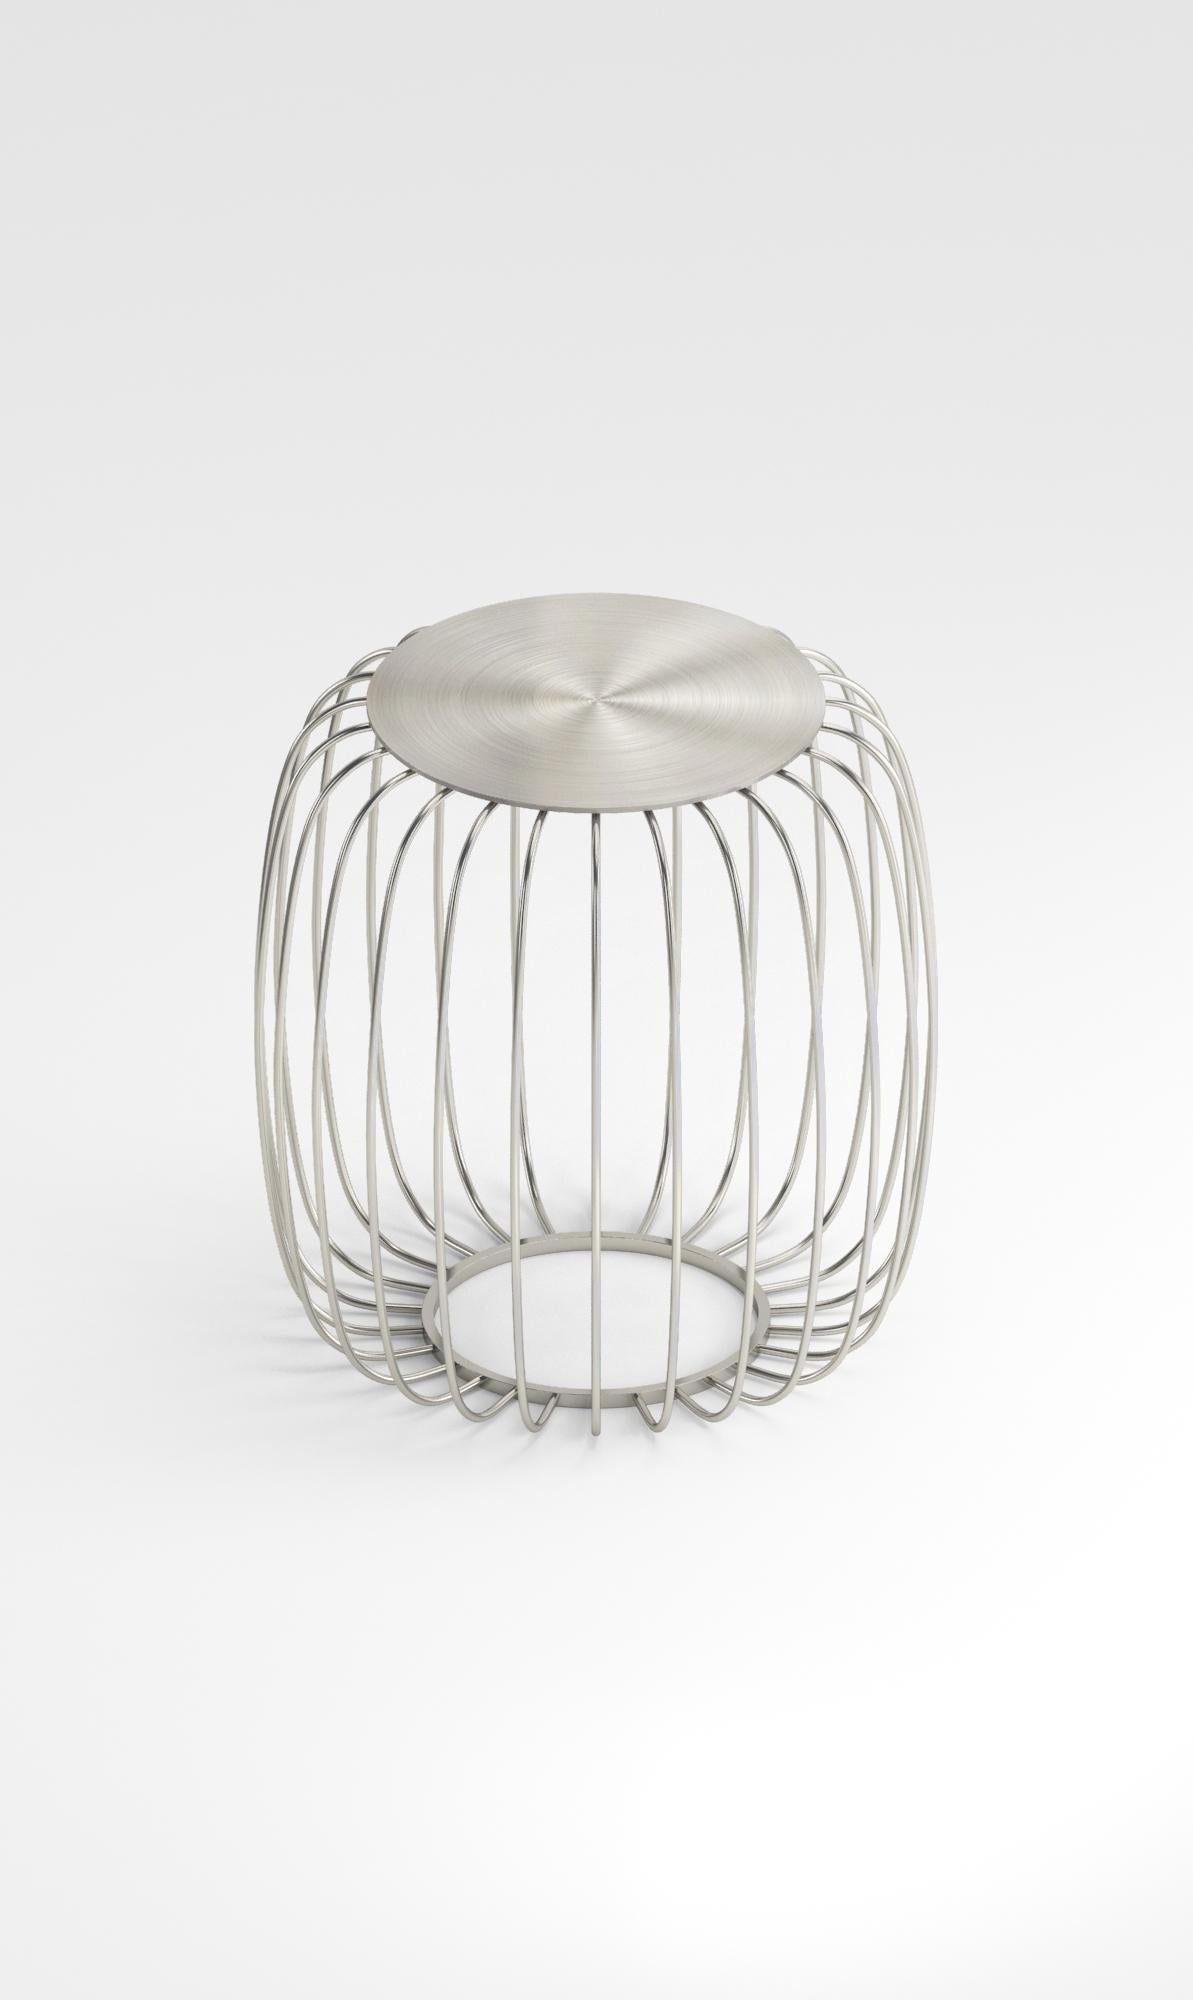 Featuring a cage of thin steel rods, Pumpkin is a multi-functional piece of furniture that serves as a coffee table, occasional table, or stool. Its design is inspired by the Ottoman kavuk, a traditional headwear worn by the pashas and viziers of